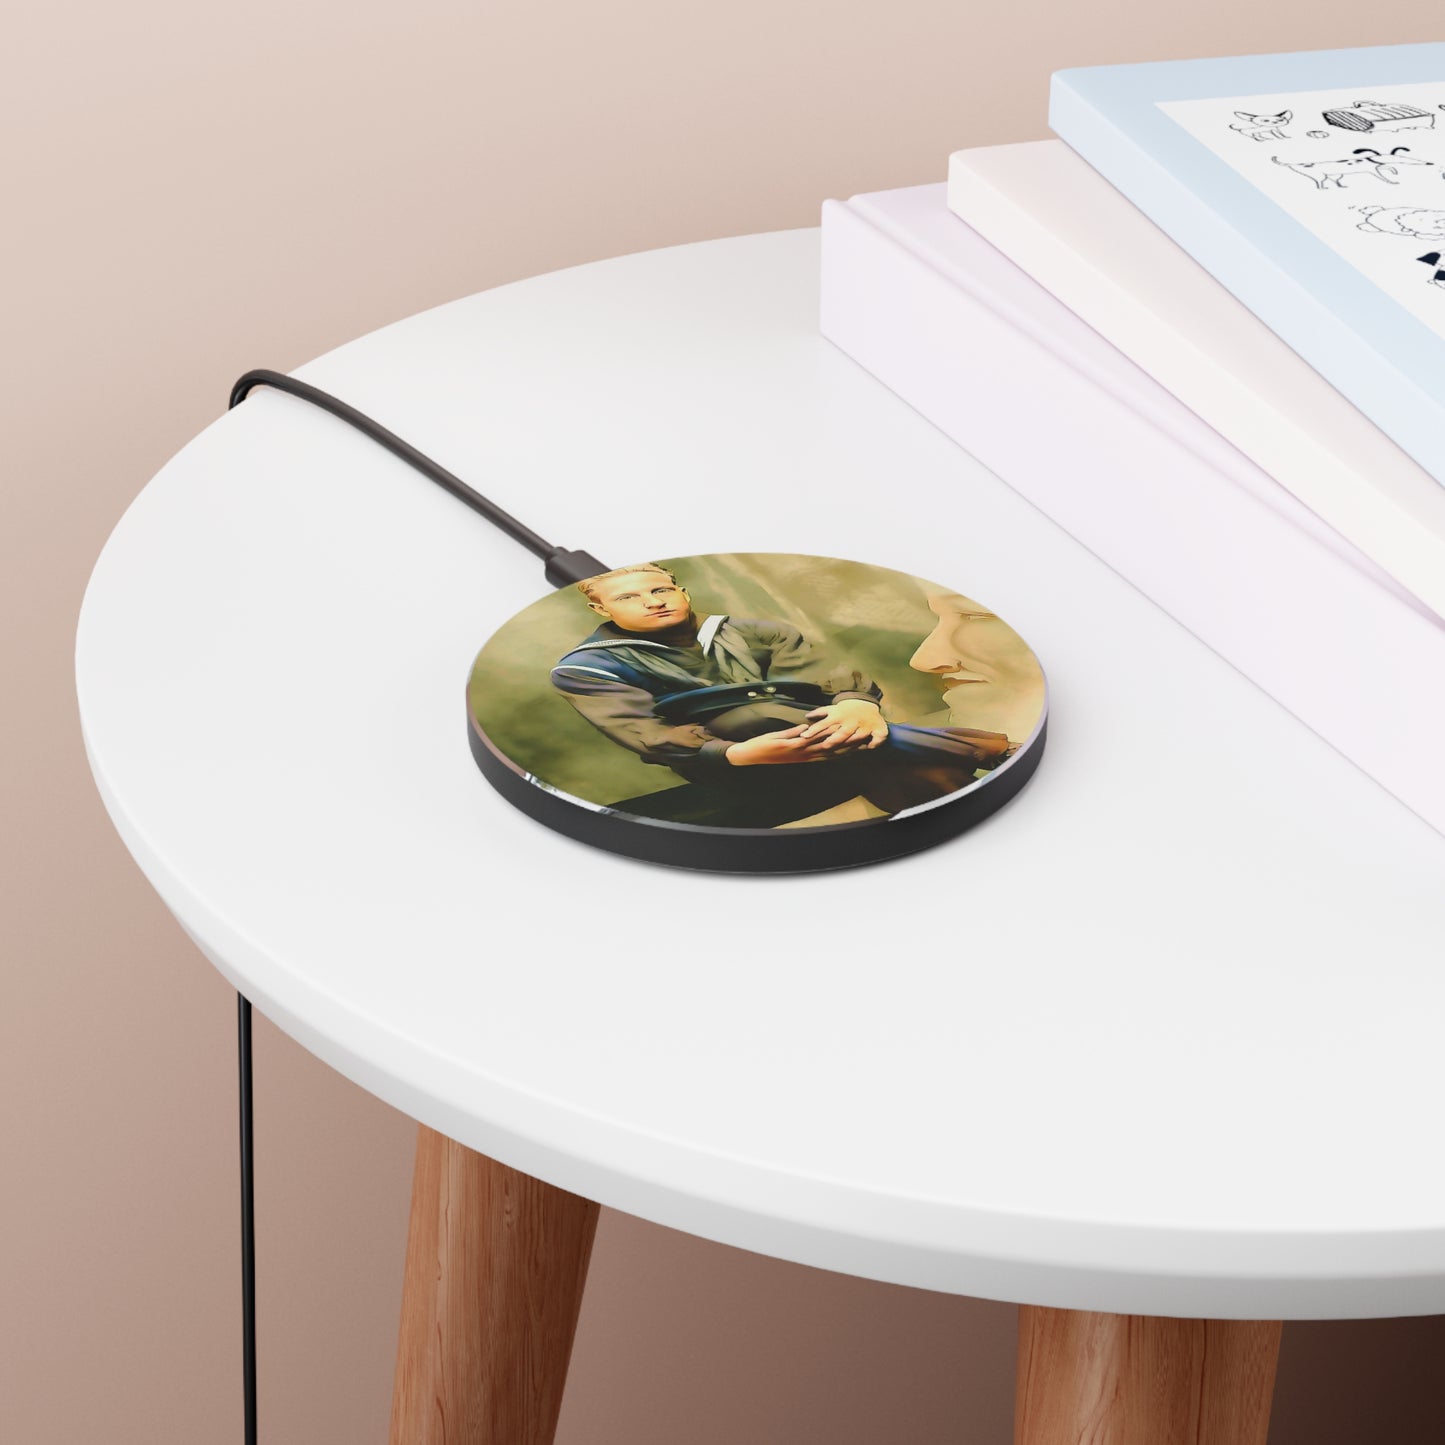 celibataire 016 | Wireless Charger Vintage Sailor Moon Photo USN Navy Gay LGBTQ Queer Single Gift